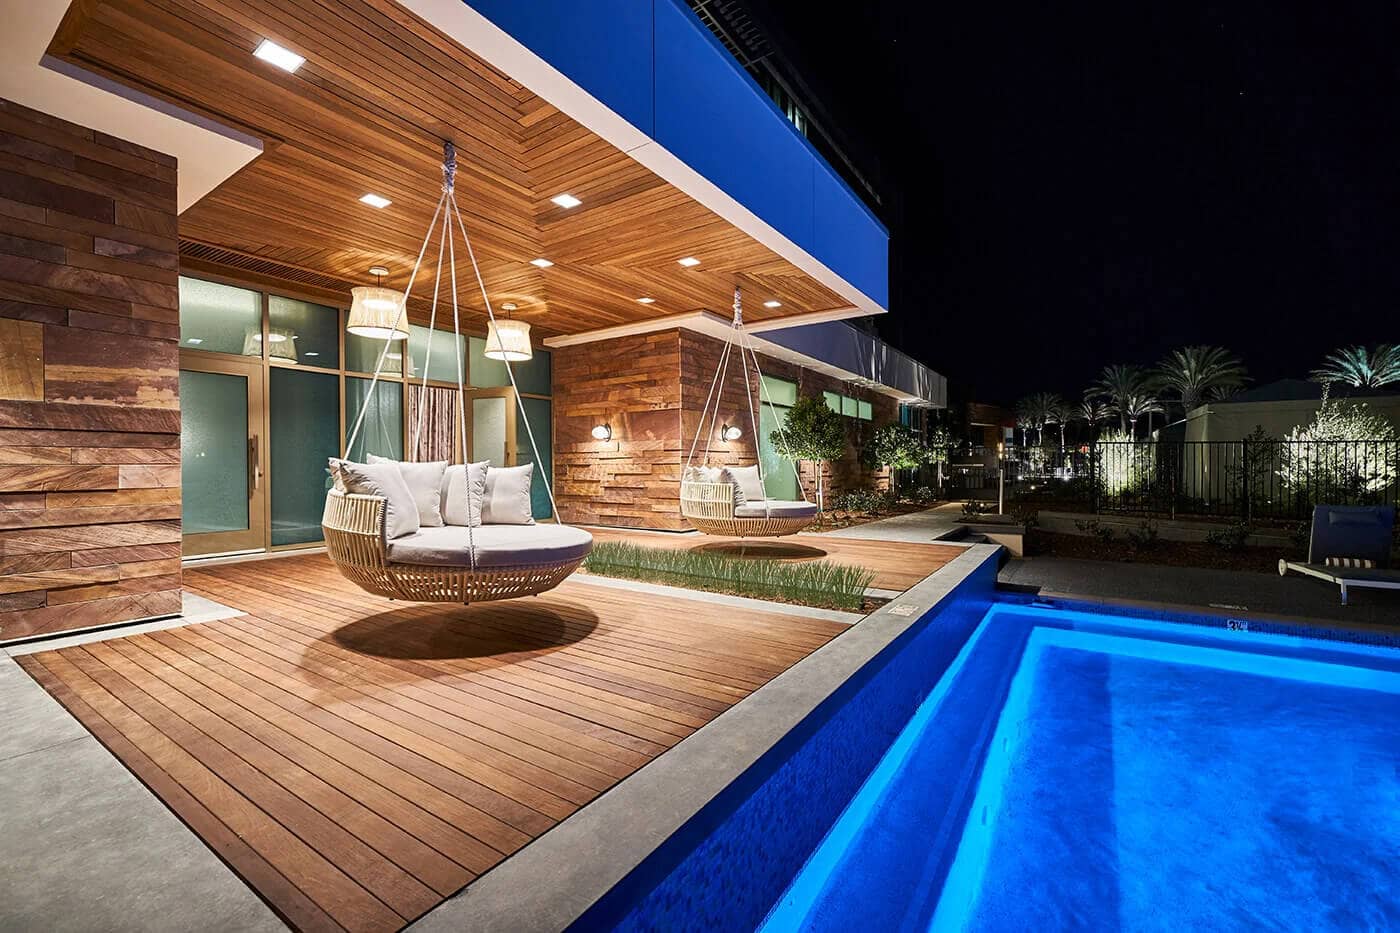 Pool and Outdoor Living Space with swing chair | Viejas Casino